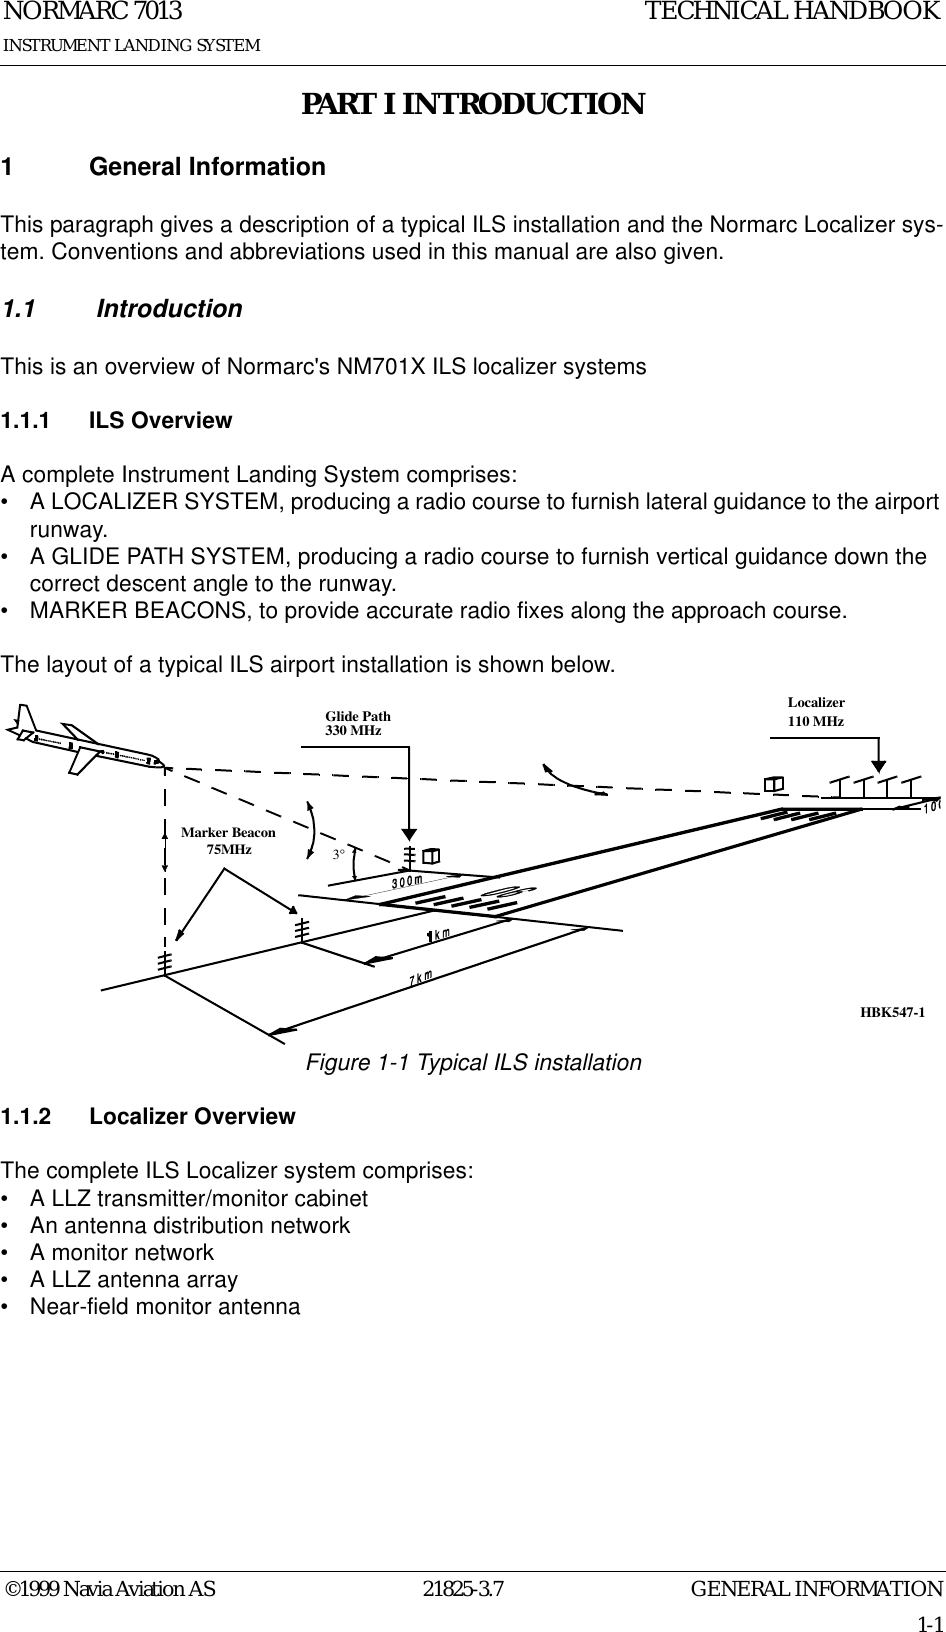 GENERAL INFORMATIONNORMARC 701321825-3.71-1©1999 Navia Aviation ASINSTRUMENT LANDING SYSTEMTECHNICAL HANDBOOKPART I INTRODUCTION1 General InformationThis paragraph gives a description of a typical ILS installation and the Normarc Localizer sys-tem. Conventions and abbreviations used in this manual are also given.1.1  IntroductionThis is an overview of Normarc&apos;s NM701X ILS localizer systems1.1.1 ILS OverviewA complete Instrument Landing System comprises:• A LOCALIZER SYSTEM, producing a radio course to furnish lateral guidance to the airport runway.• A GLIDE PATH SYSTEM, producing a radio course to furnish vertical guidance down the correct descent angle to the runway.• MARKER BEACONS, to provide accurate radio fixes along the approach course.The layout of a typical ILS airport installation is shown below.Figure 1-1 Typical ILS installation1.1.2 Localizer OverviewThe complete ILS Localizer system comprises:• A LLZ transmitter/monitor cabinet• An antenna distribution network• A monitor network• A LLZ antenna array• Near-field monitor antennaLocalizer110 MHzGlide Path330 MHzMarker Beacon75MHz3°HBK547-1